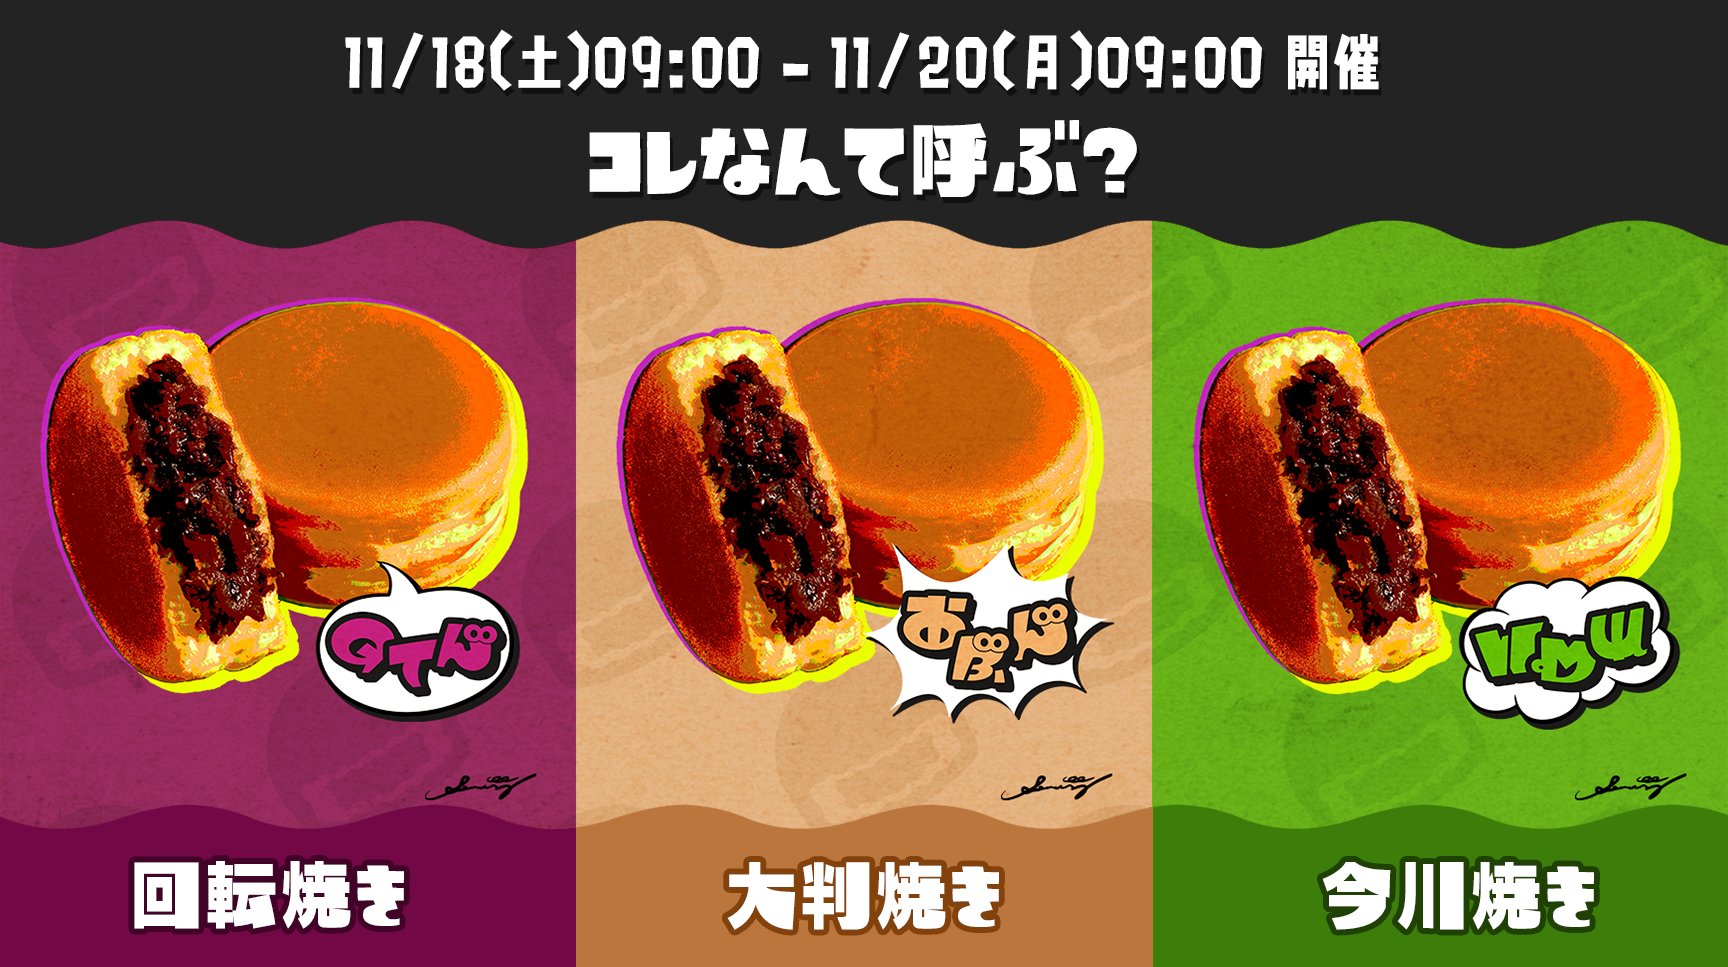 Next Splatfest Based on Traditional Snack Coming to Japan